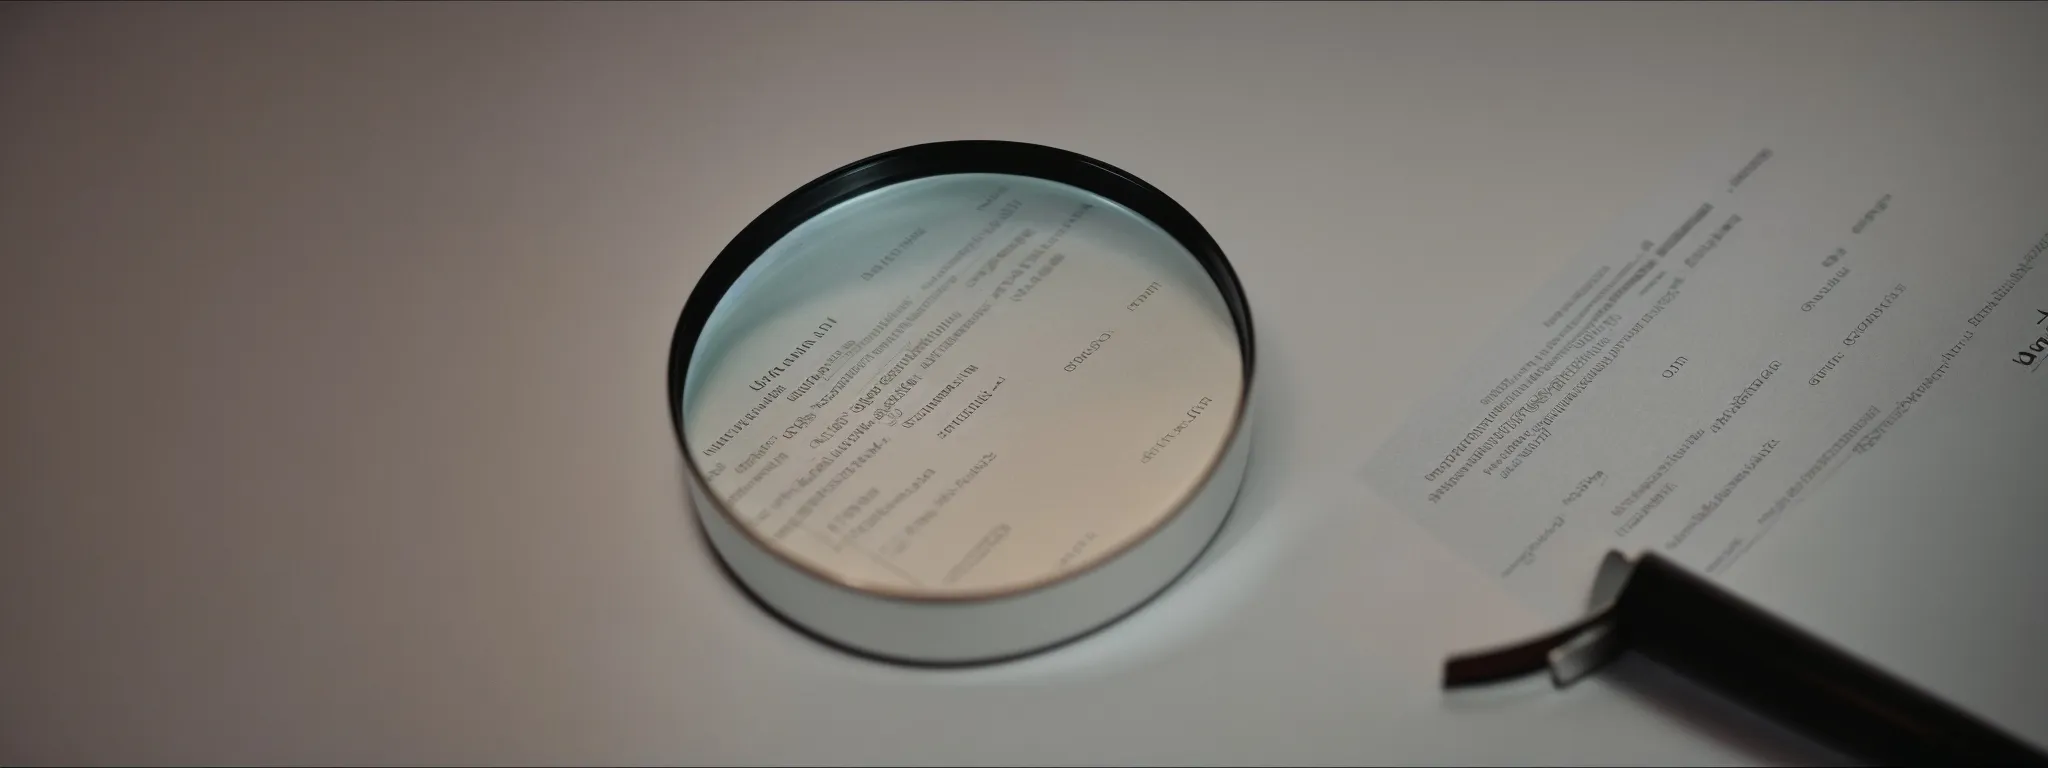 an illuminated magnifying glass hovering over a dense keyword data sheet, casting a warm glow on a marketer's desk.